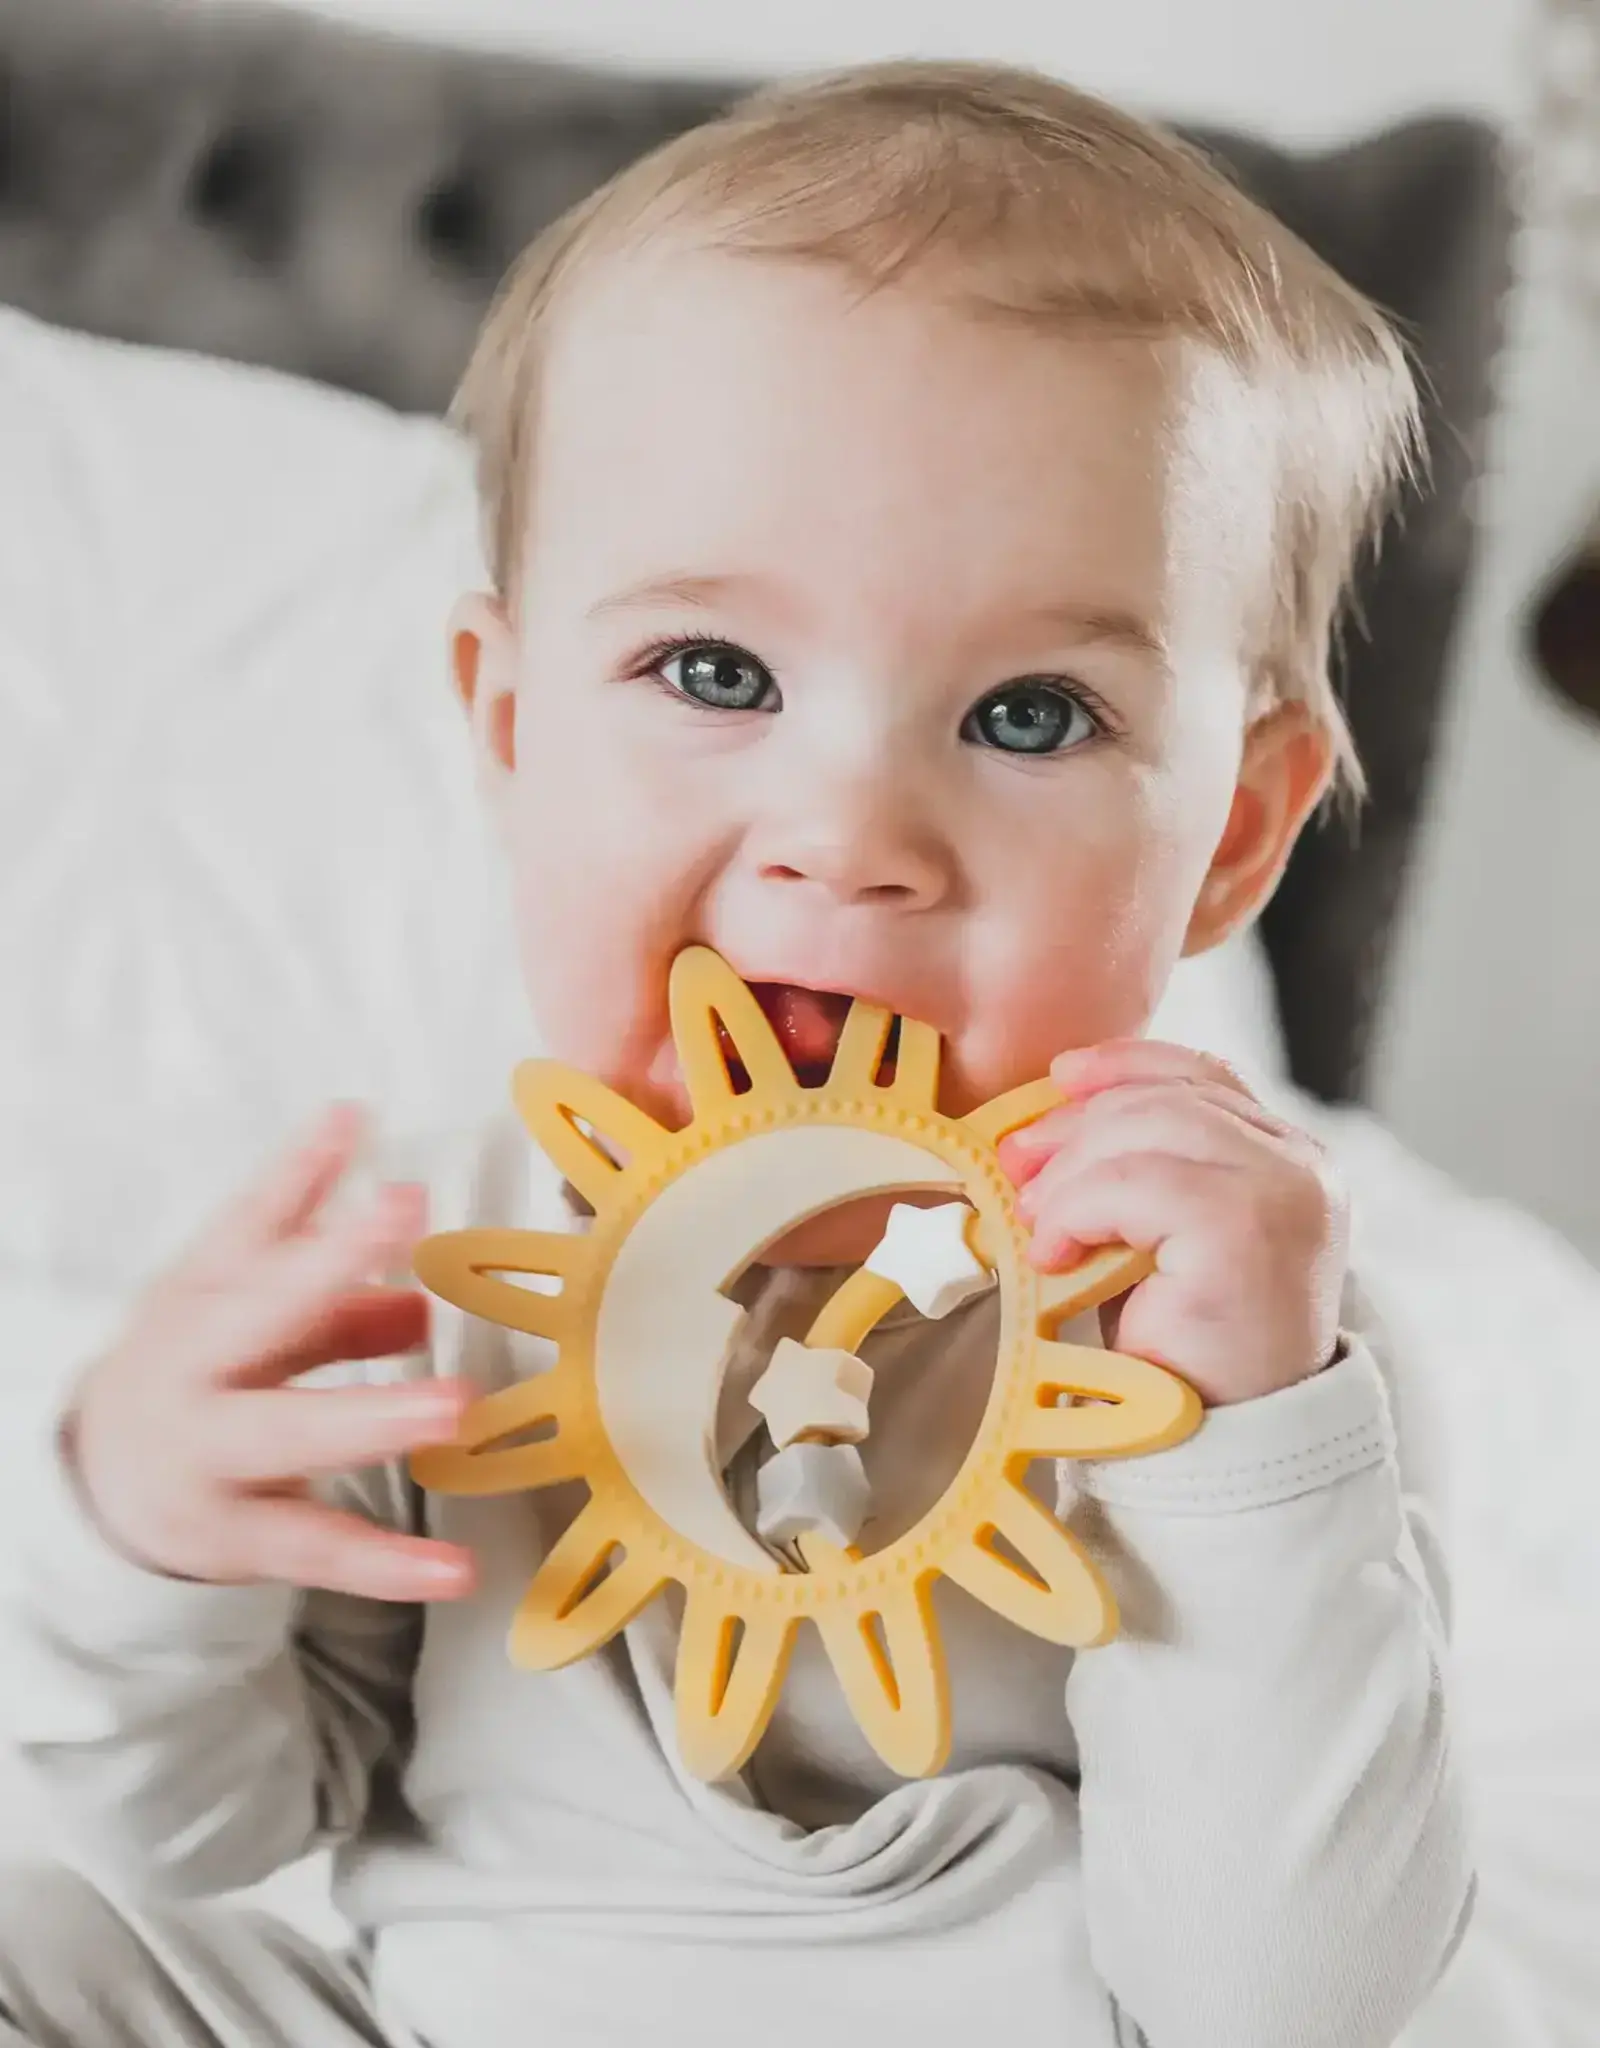 Lucy Darling Celestial Skies Teether Sensory Toy